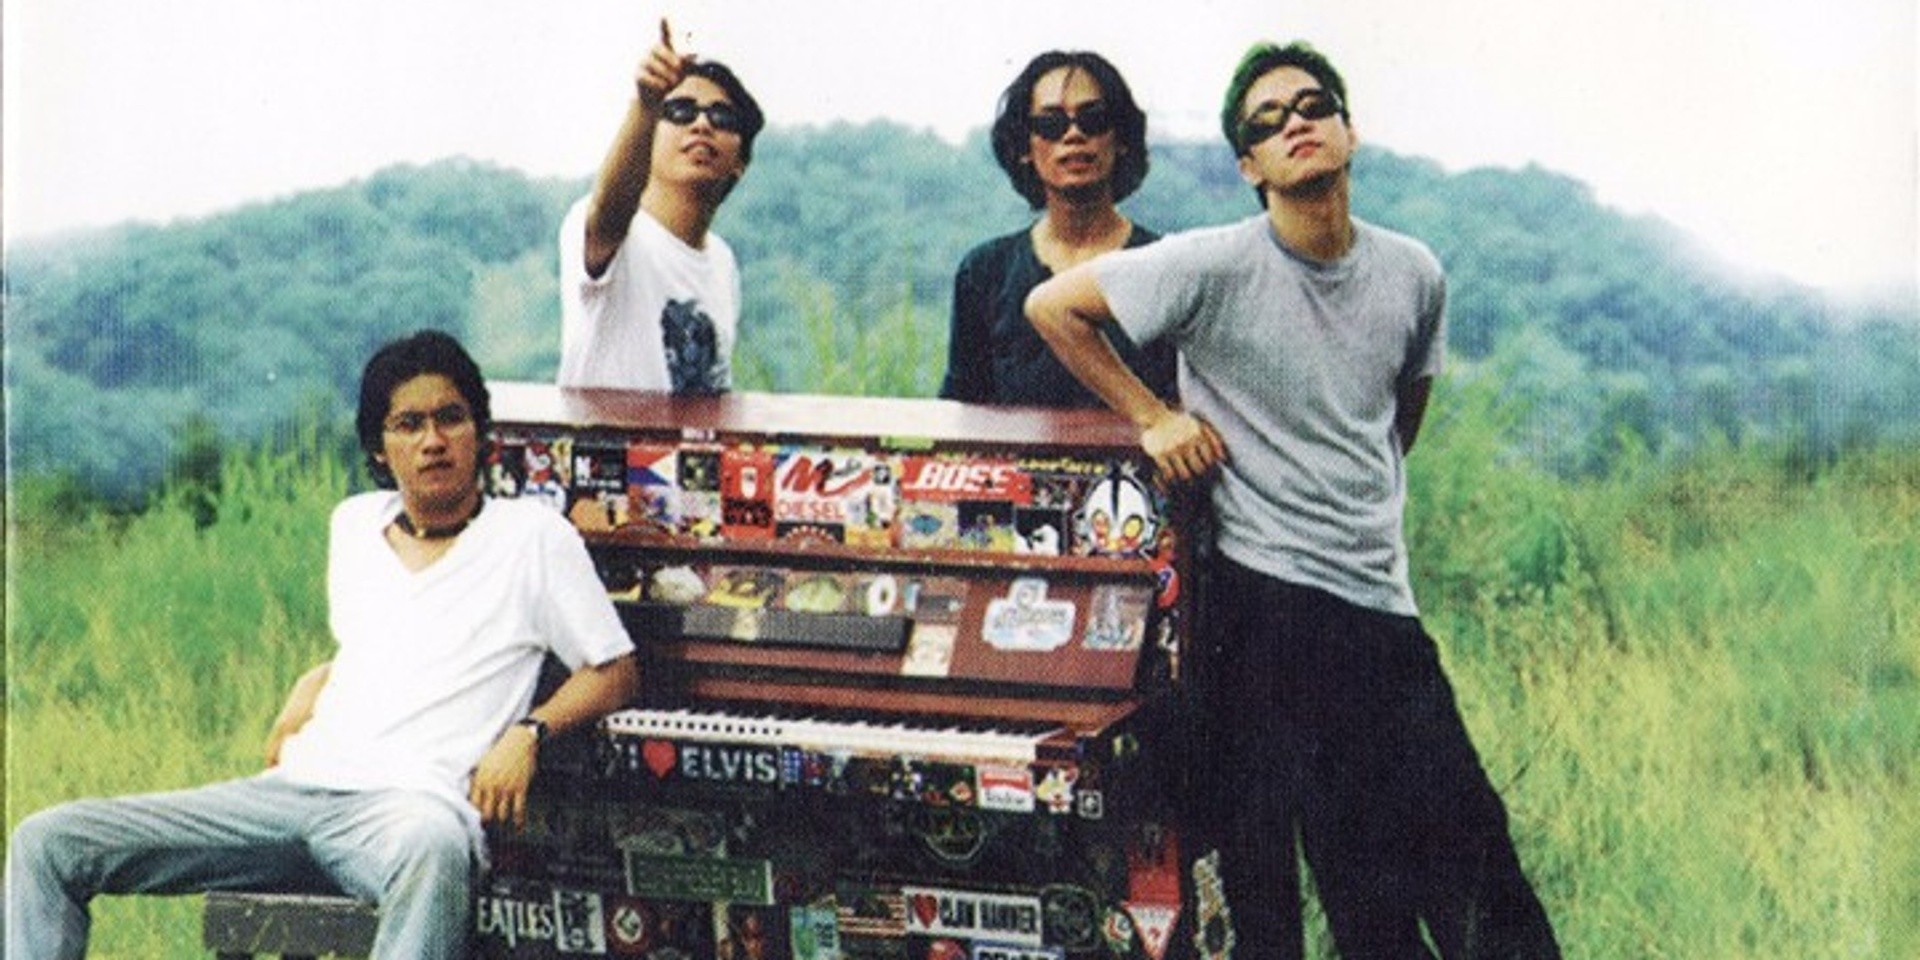 The Eraserheads celebrate 20 years of Sticker Happy with new Team Manila merch collection